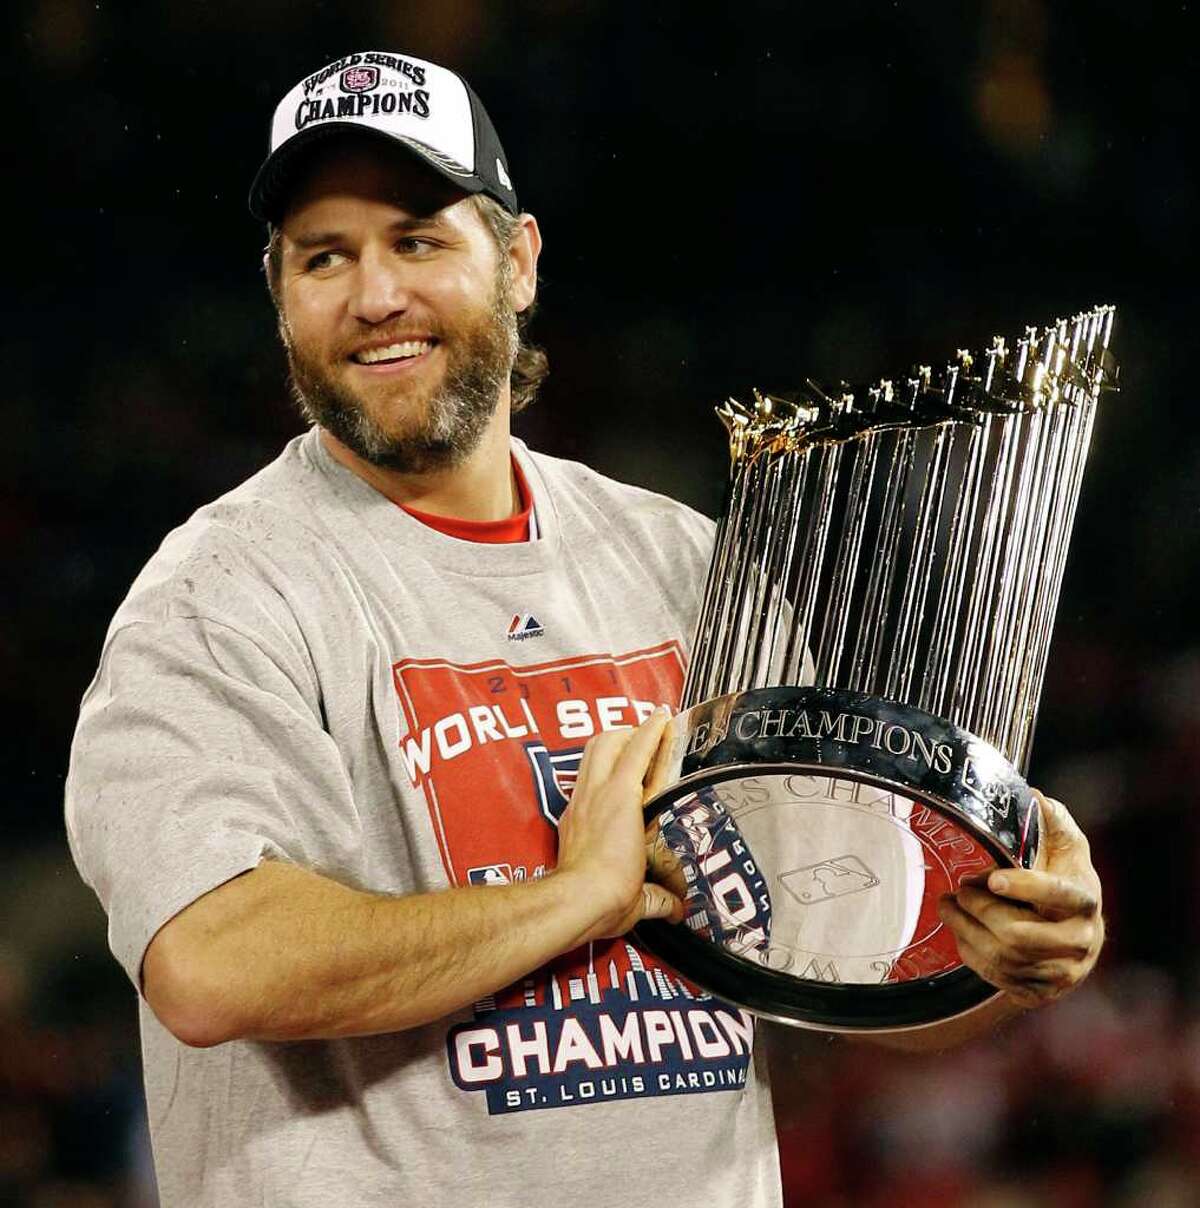 St. Louis Cardinals' Lance Berkman holds up the Commissioner's Trophy after Game 7 of baseball's World Series against the Texas Rangers Friday, Oct. 28, 2011, in St. Louis. The Cardinals won 6-2 to win the series. (AP Photo/Eric Gay)